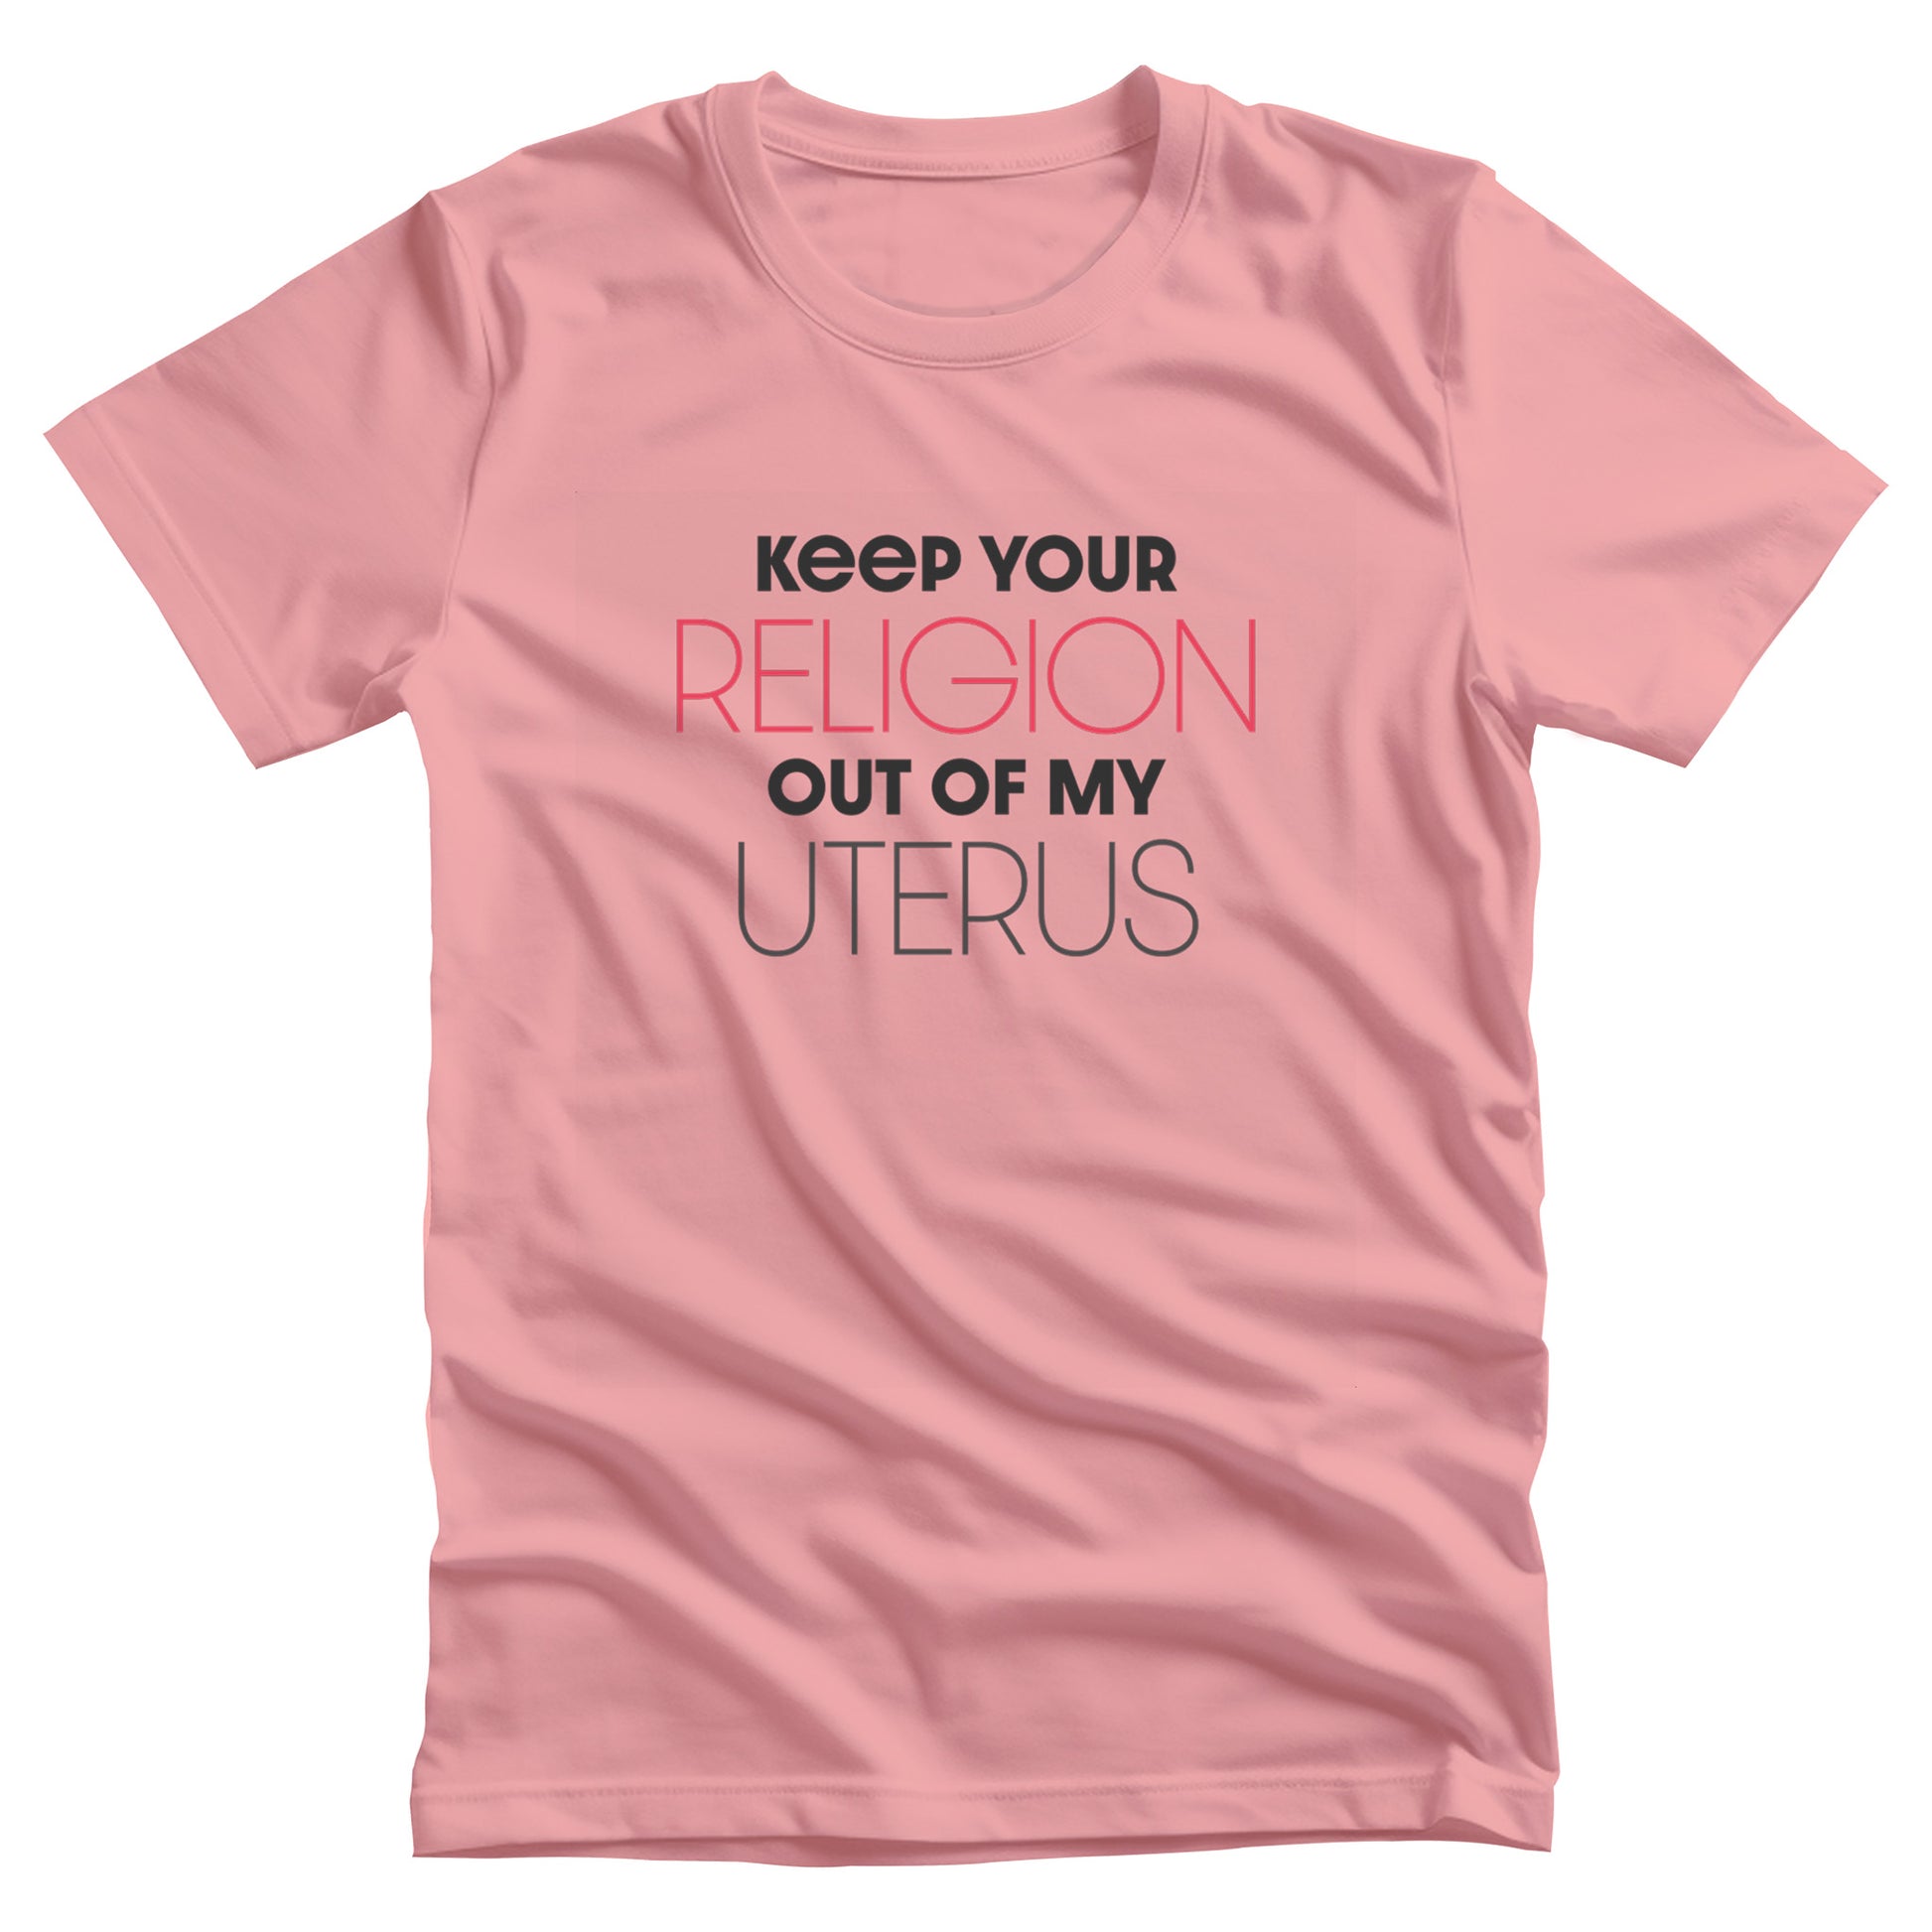 Pink unisex t-shirt that says, “Keep Your Religion Out of My Uterus” in all caps. “Keep Your” is bold, “Religion” is on the next line, is a larger size, and is red, “out of my” is beneath that and in bold, and “uterus” is on the last line